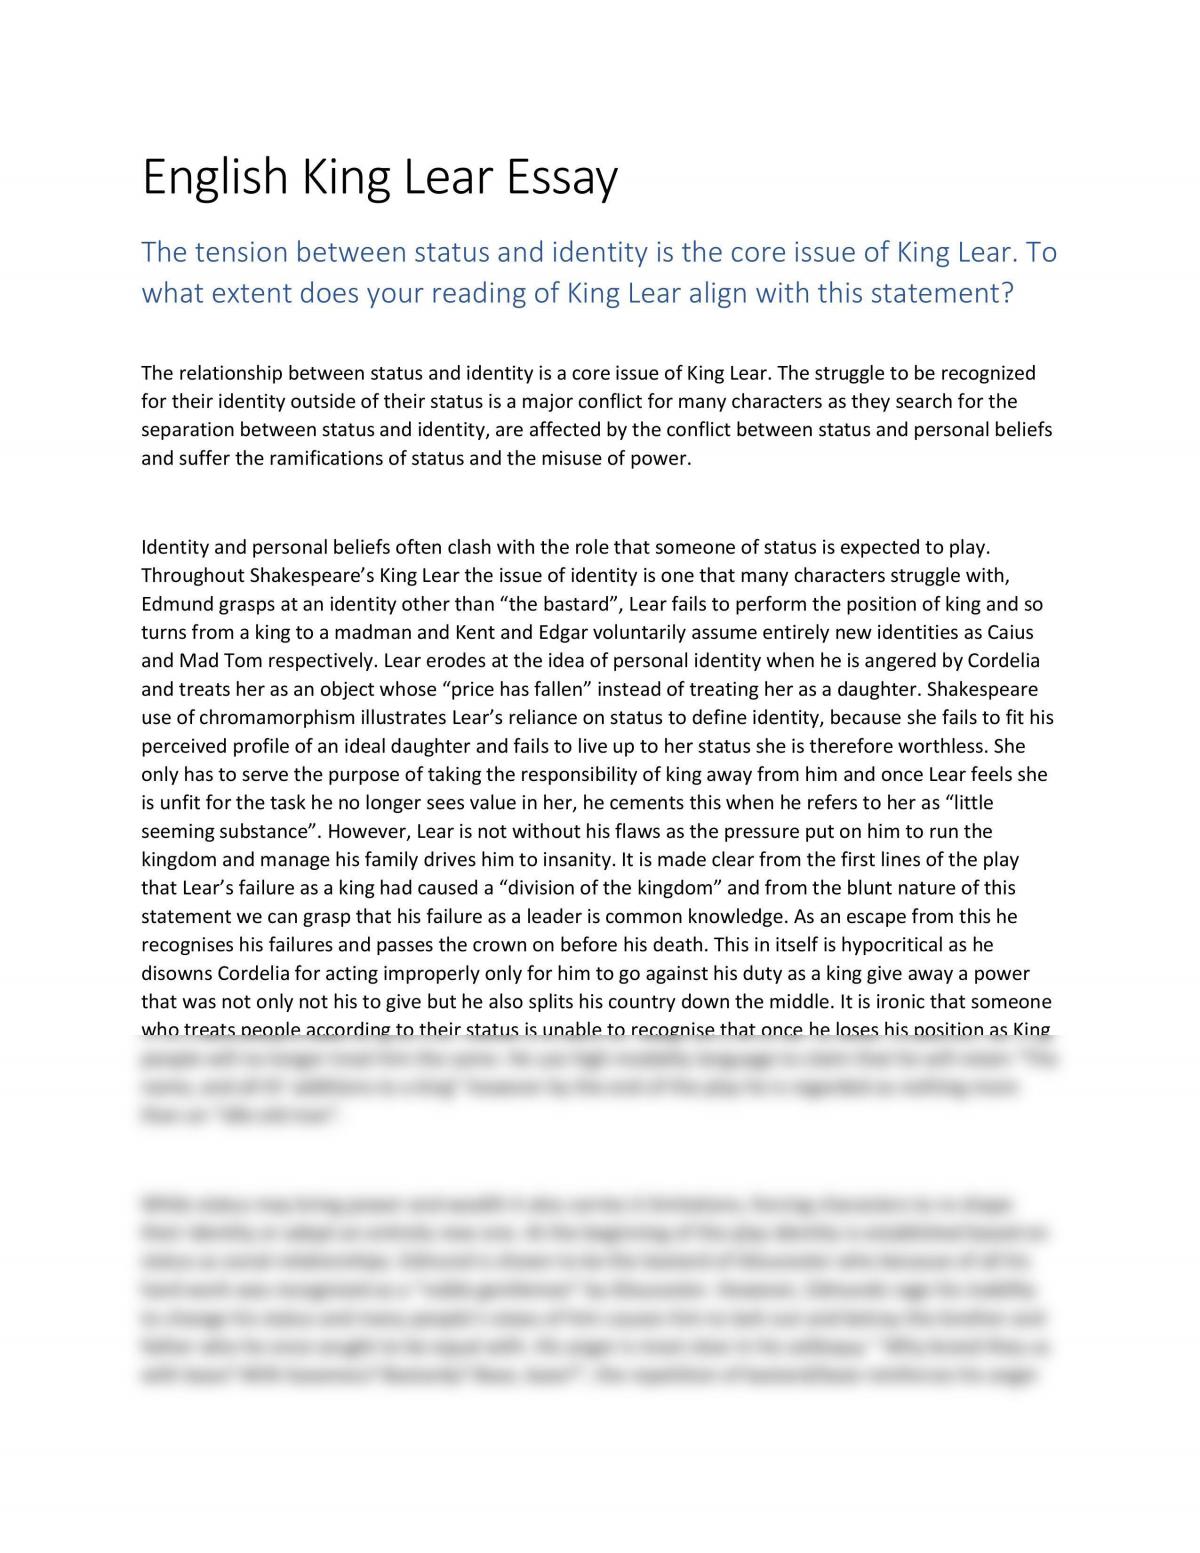 king lear example essay